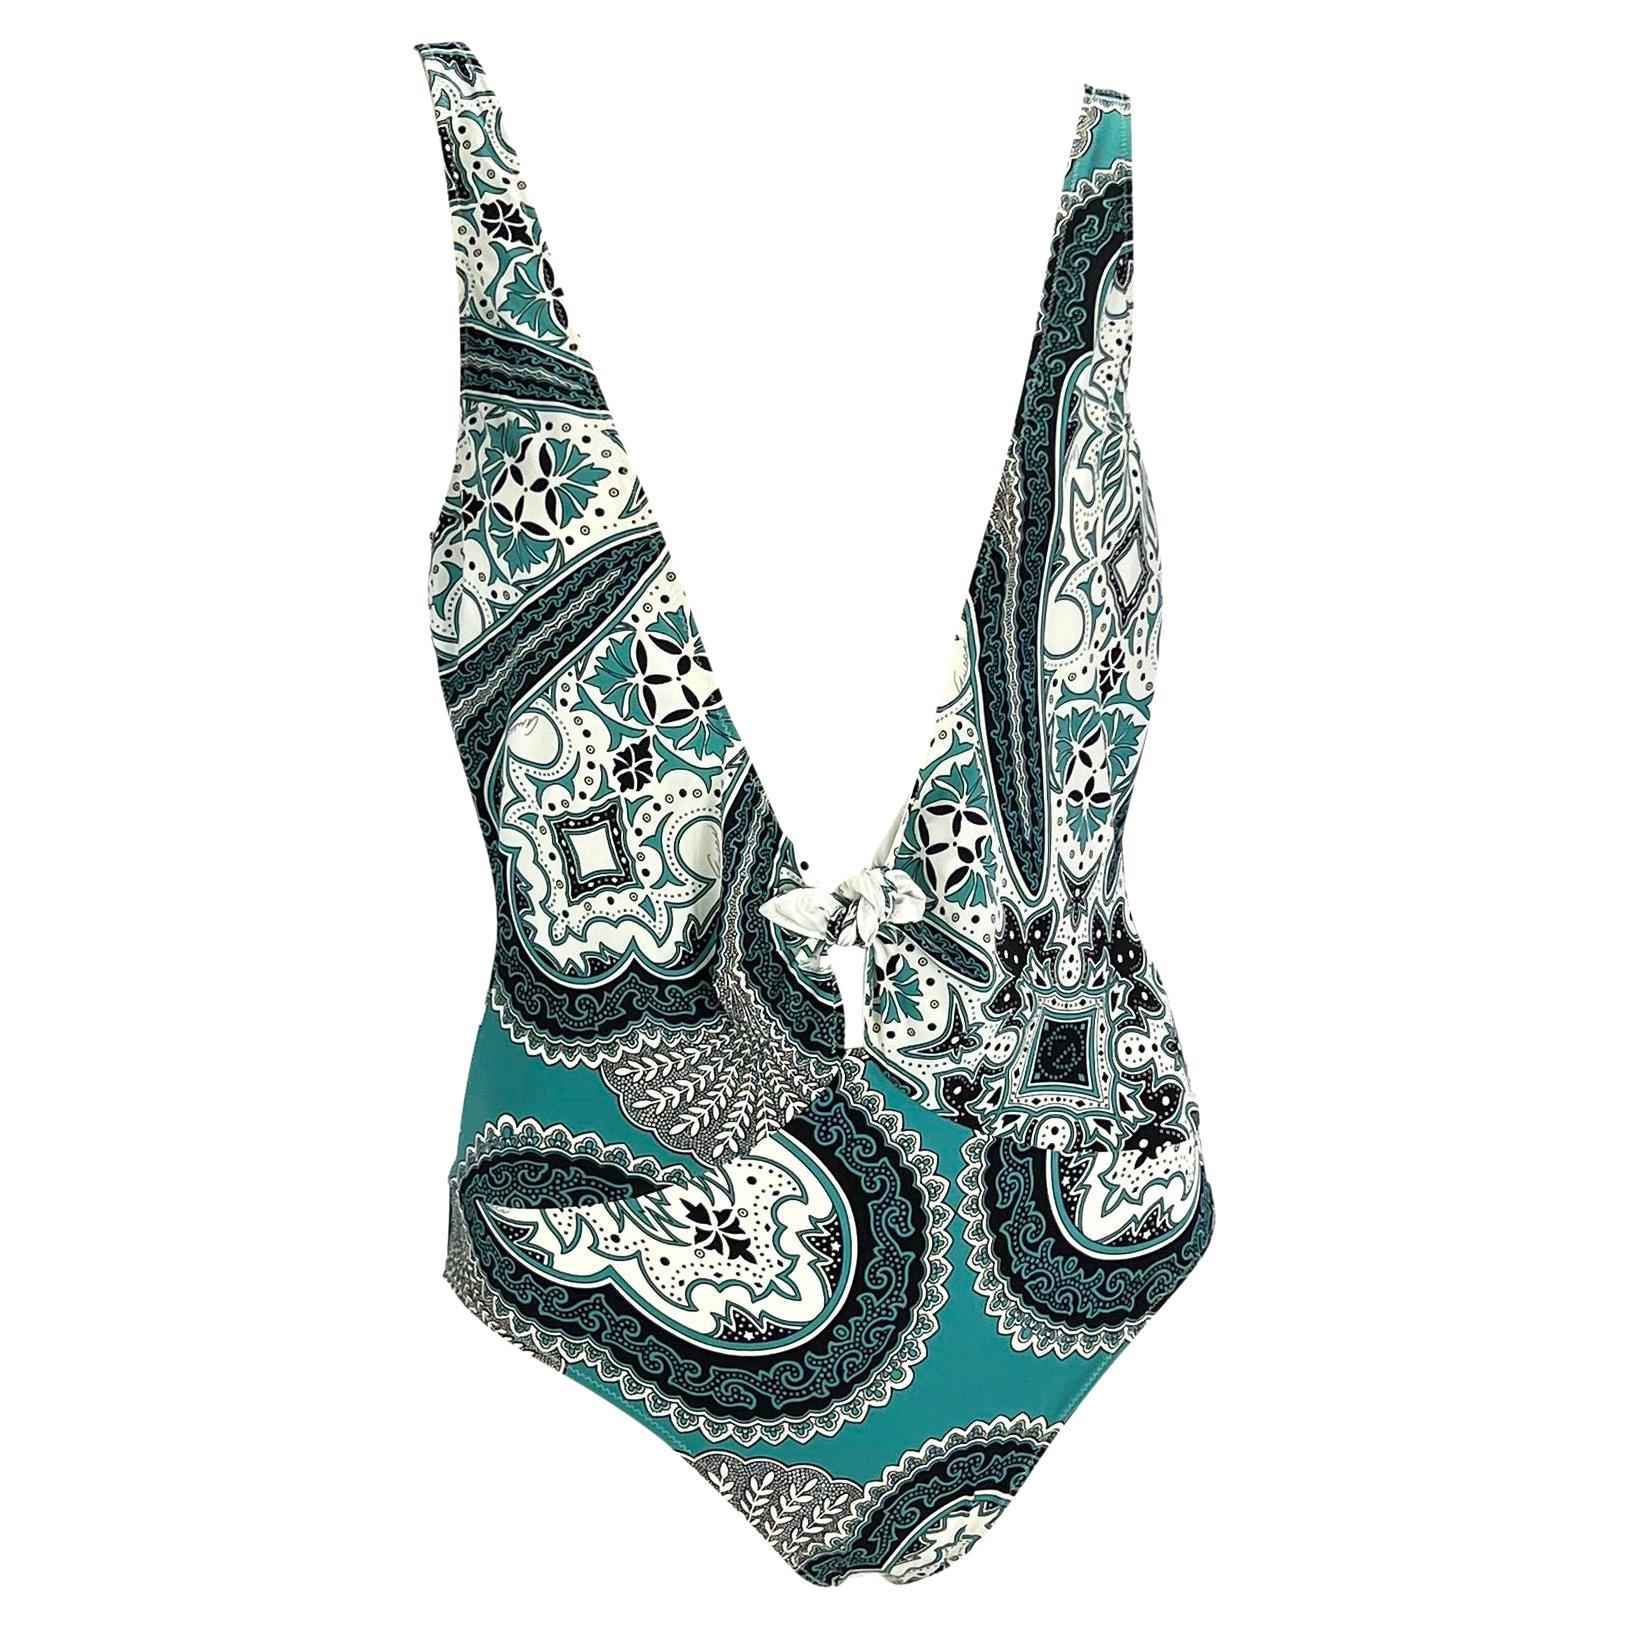 Cruise 2004 Gucci by Tom Ford Teal Blue Bandana Print One Piece Swimsuit NWT In Excellent Condition For Sale In West Hollywood, CA